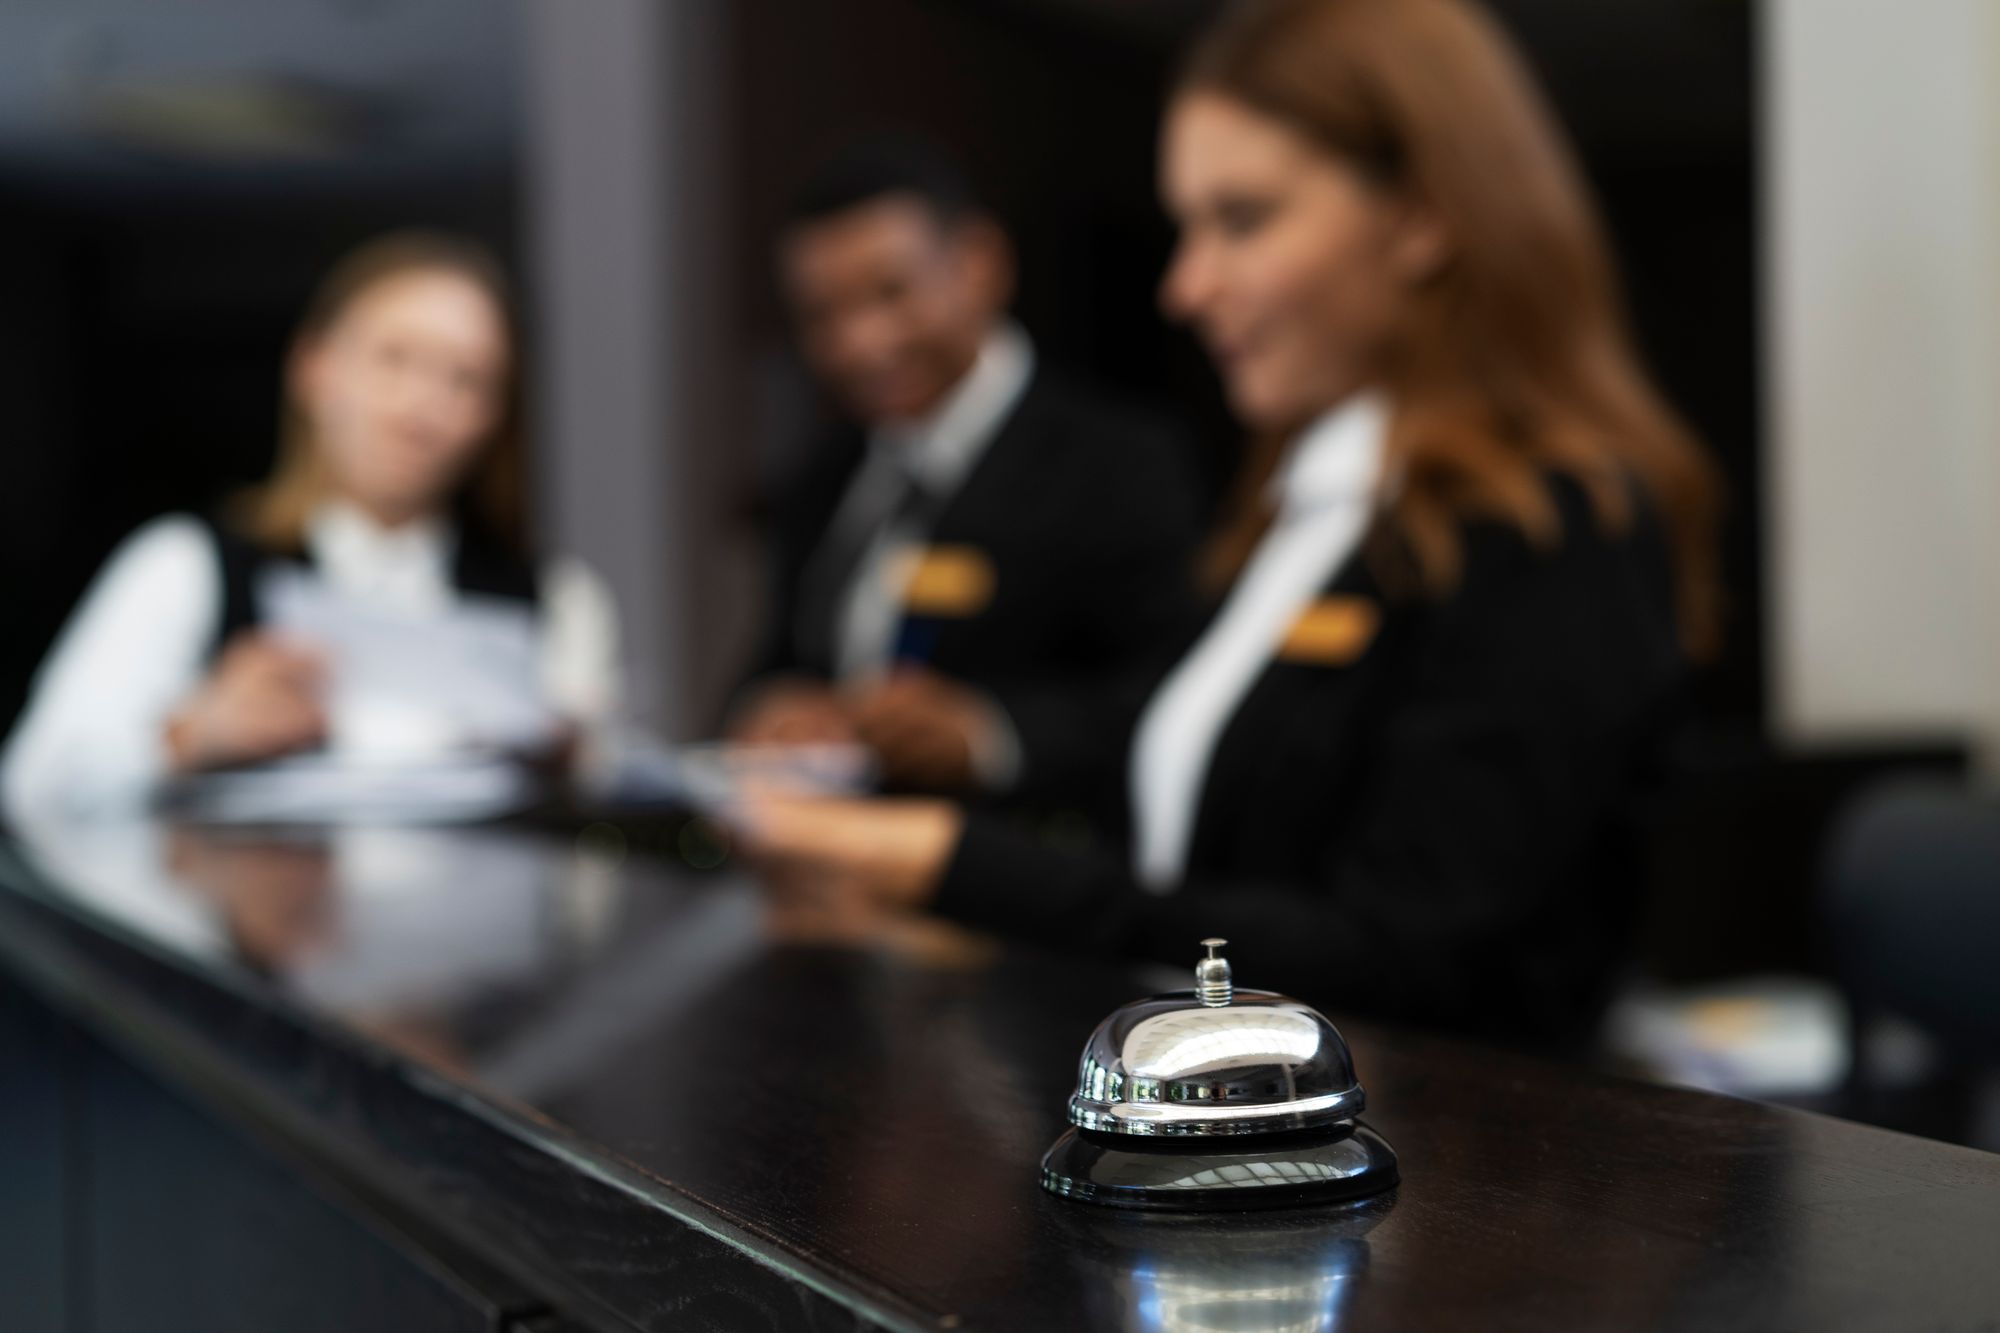 Skills gap in hotel industry - Why a new approach is needed